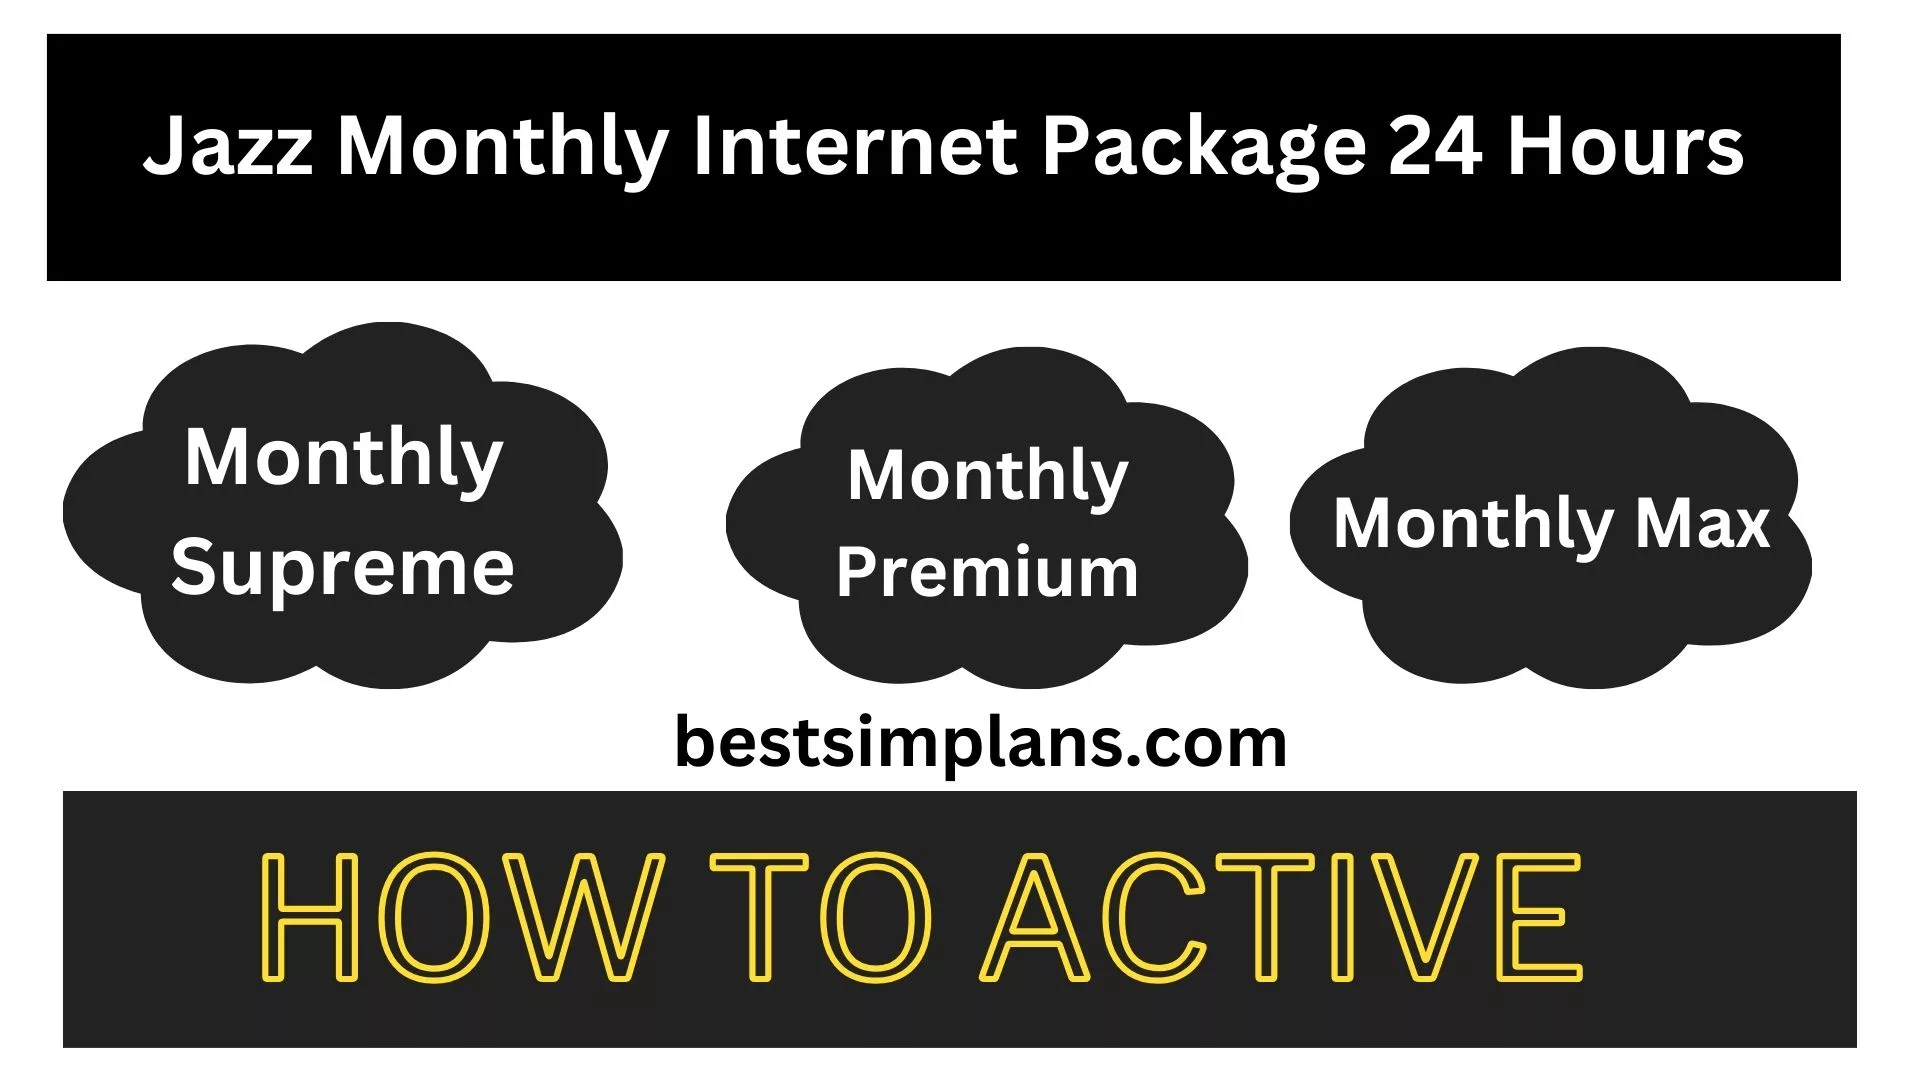 Jazz Monthly Internet Package 24 Hours